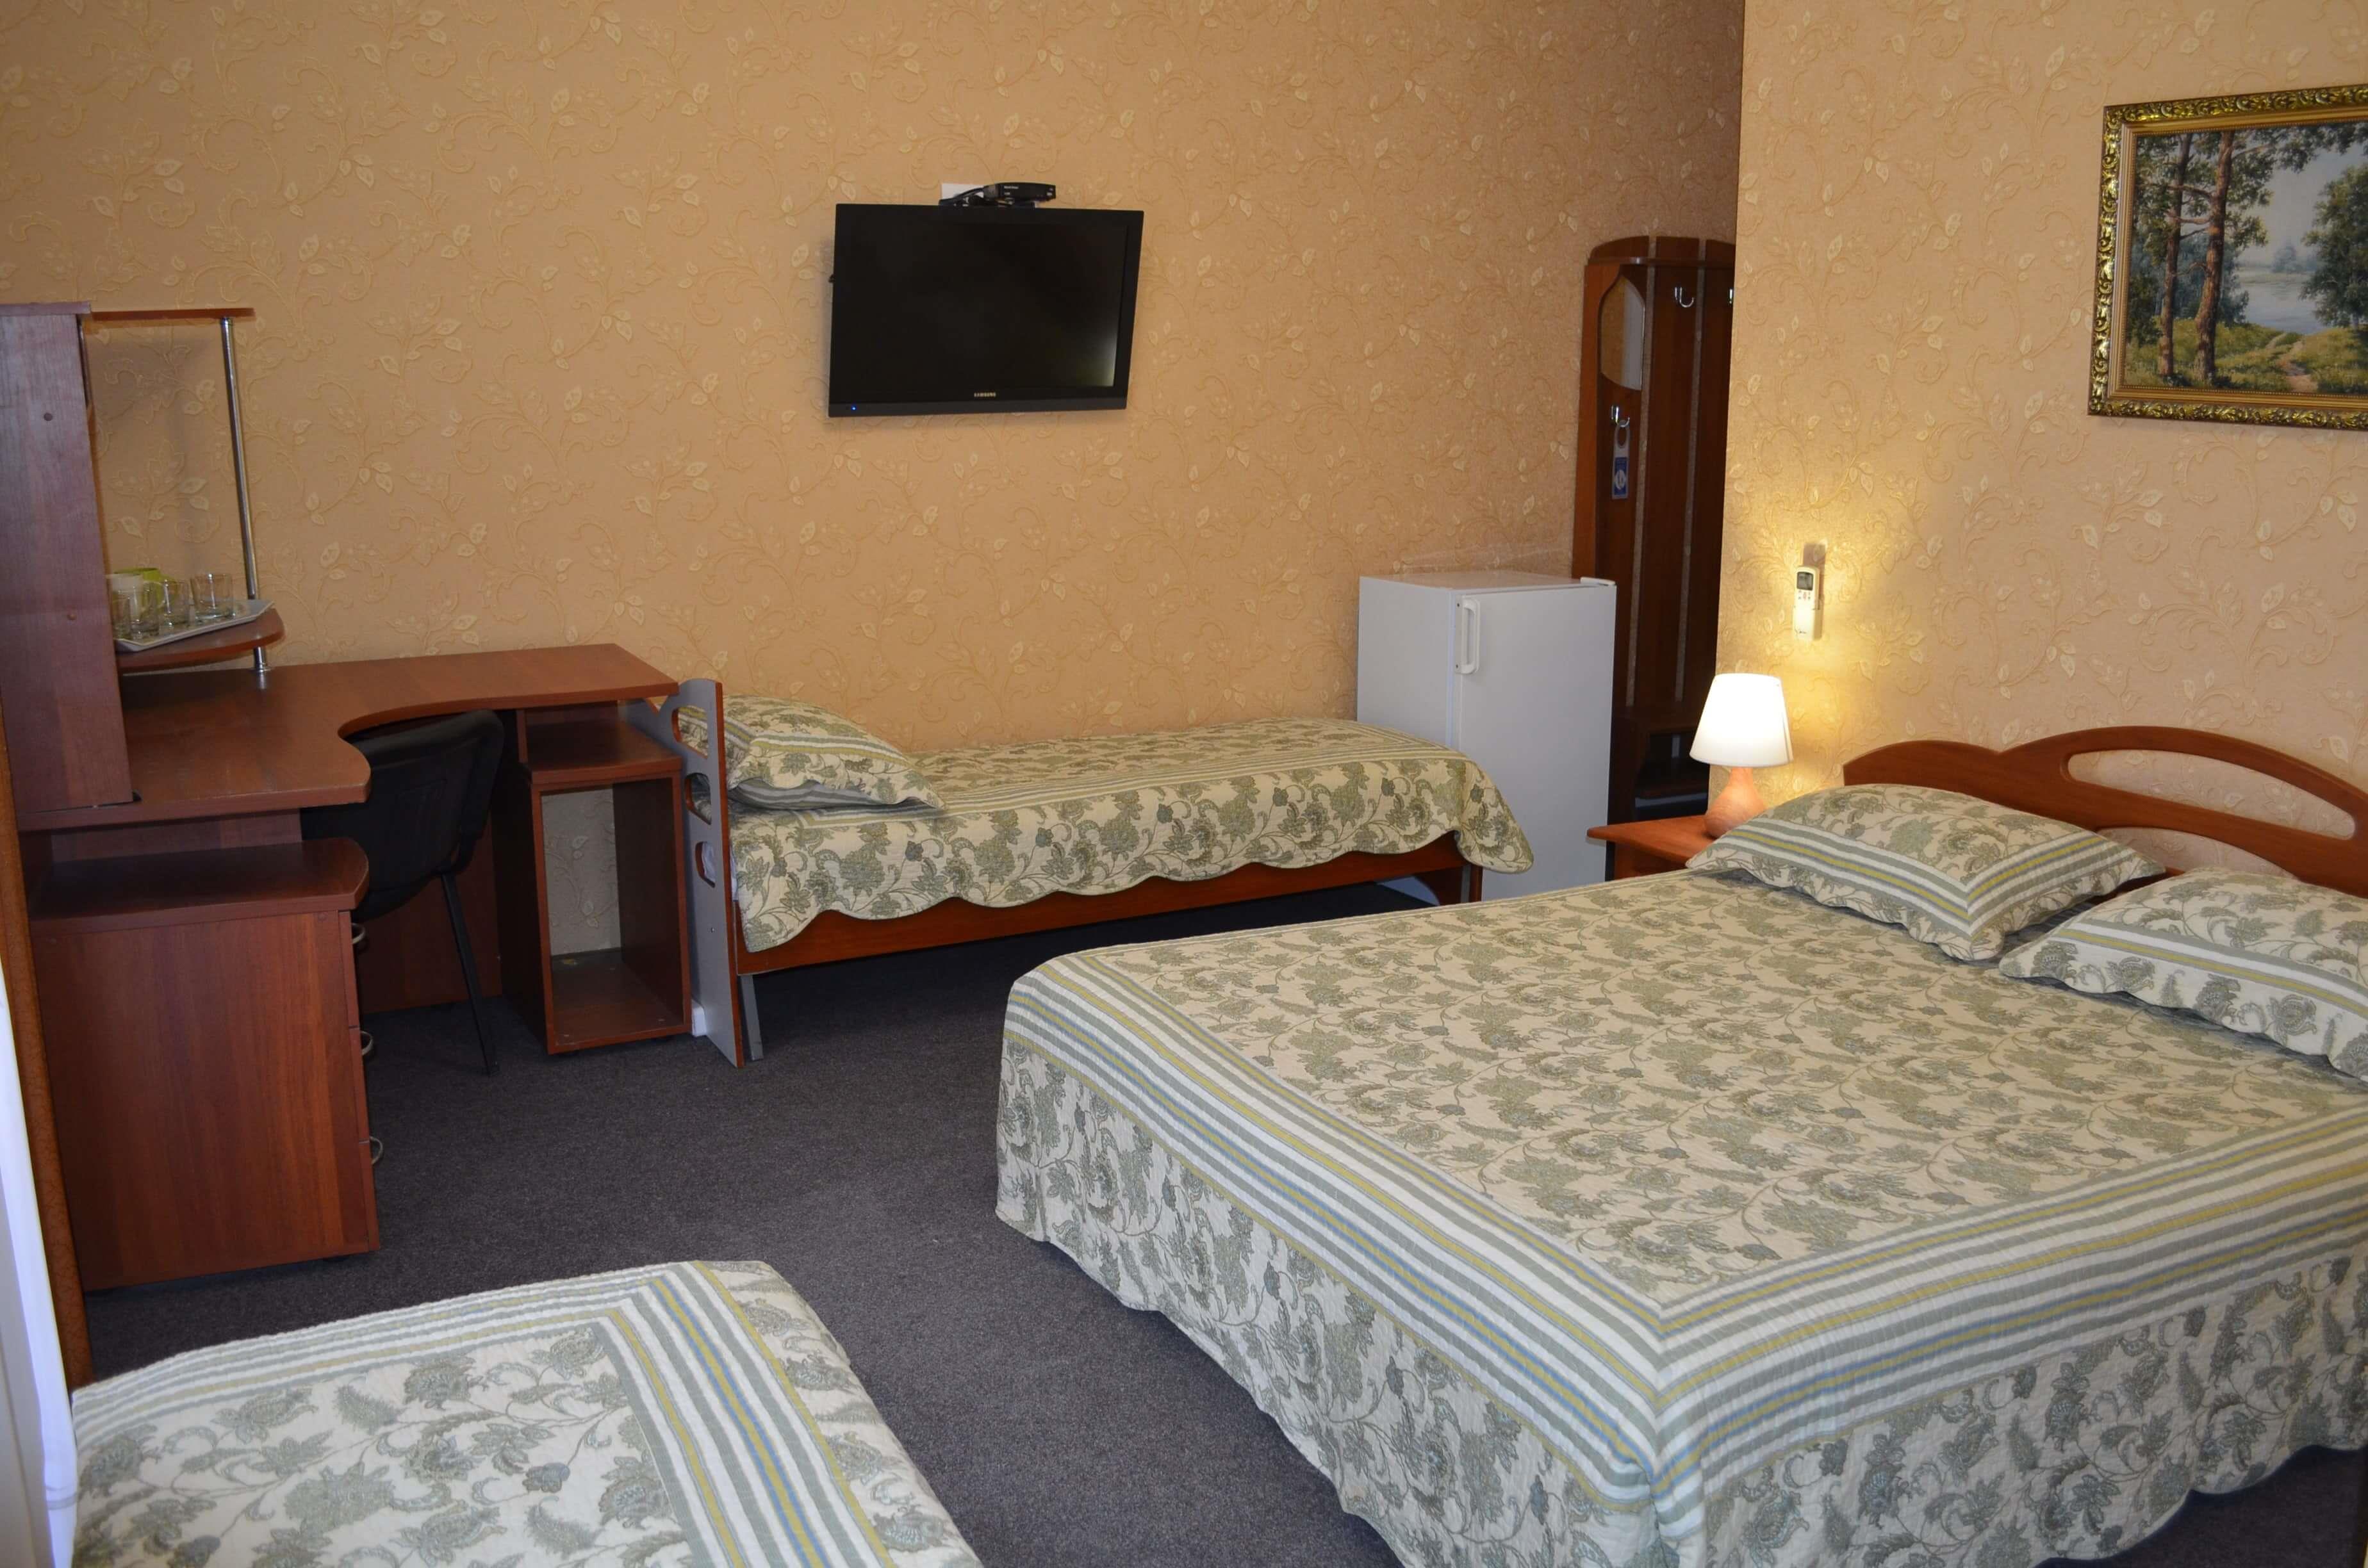 Guest House Milanka 1*